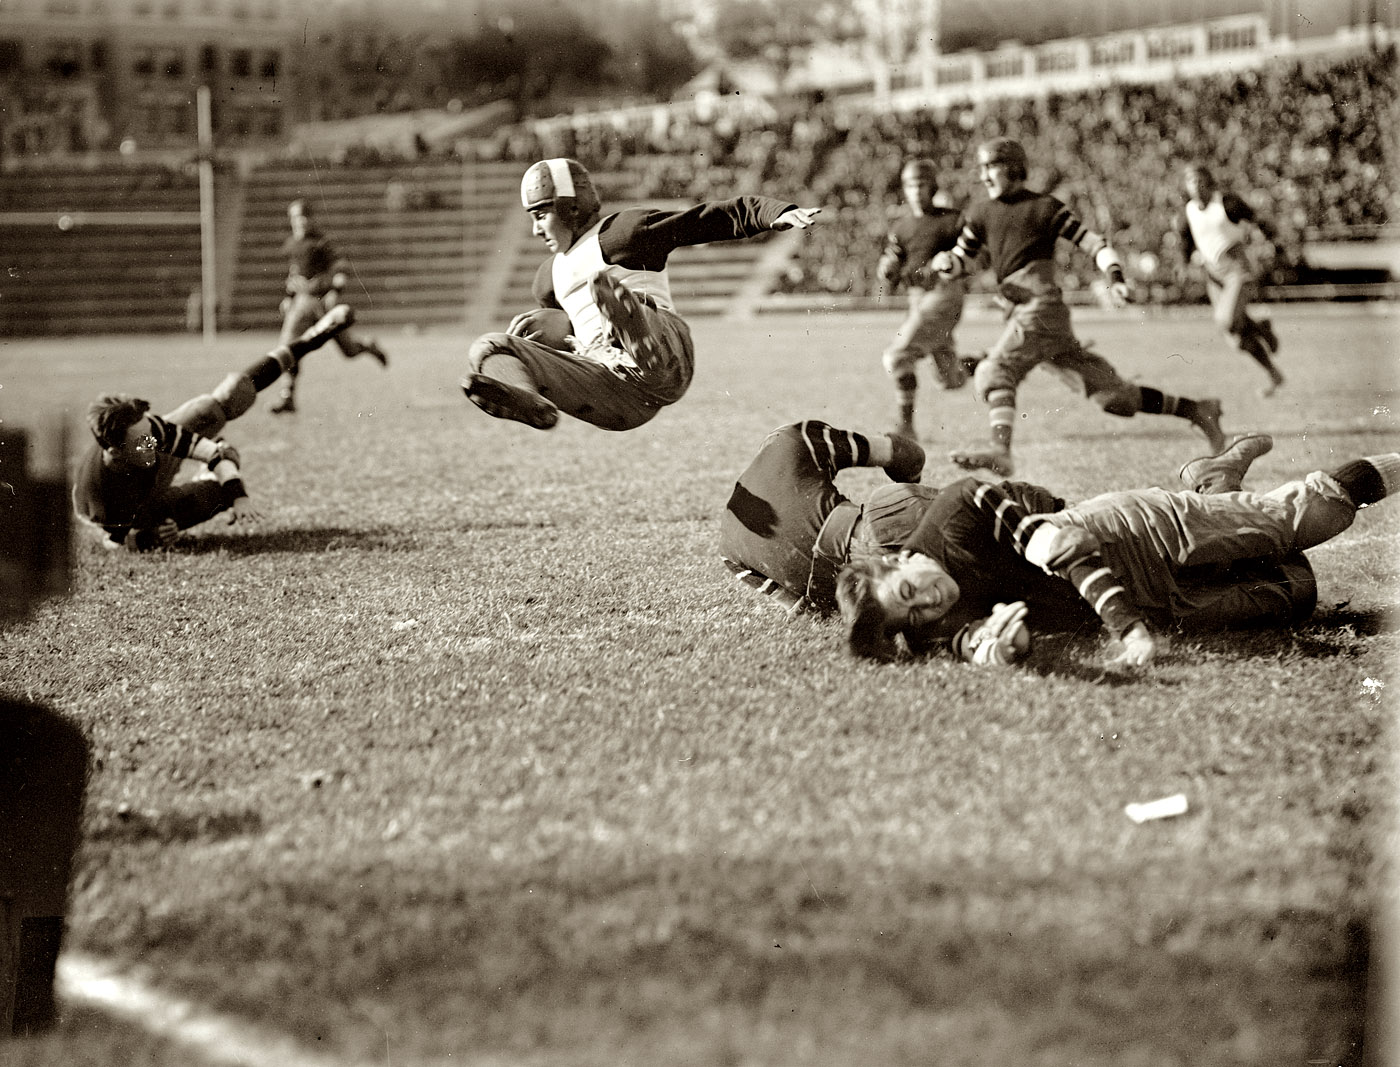 Washington, D.C. November 3, 1923. High school football: "Eastern v. Central." View full size. National Photo Company Collection glass negative.